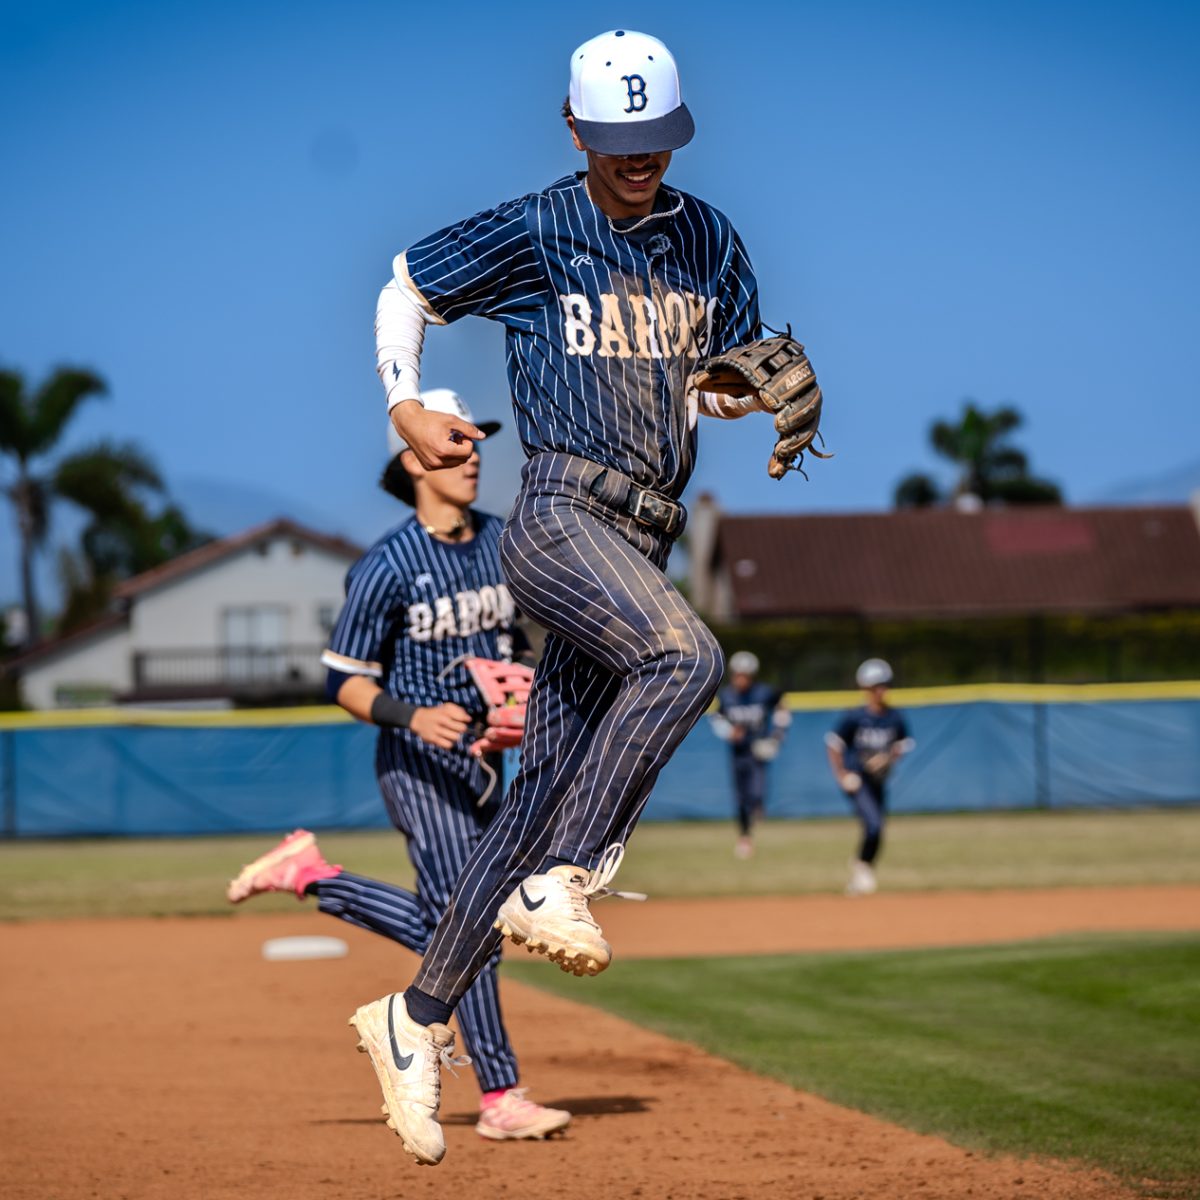 On+May.+2%2C+the+Bonita+Vista+High+%28BVH%29+Barons+boys+varsity+baseball+team+took+on+the+Otay+Ranch+High+%28ORH%29+Mustangs+in+a+twelve+inning+battle%2C+ending+in+a+3-2+victory.+BVH+shortstop+and+senior+Luis+Sosa+%286%29+celebrates+after+the+Barons+take+down+the+Mustangs+in+order+to+end+the+top+half+of+the+inning.+